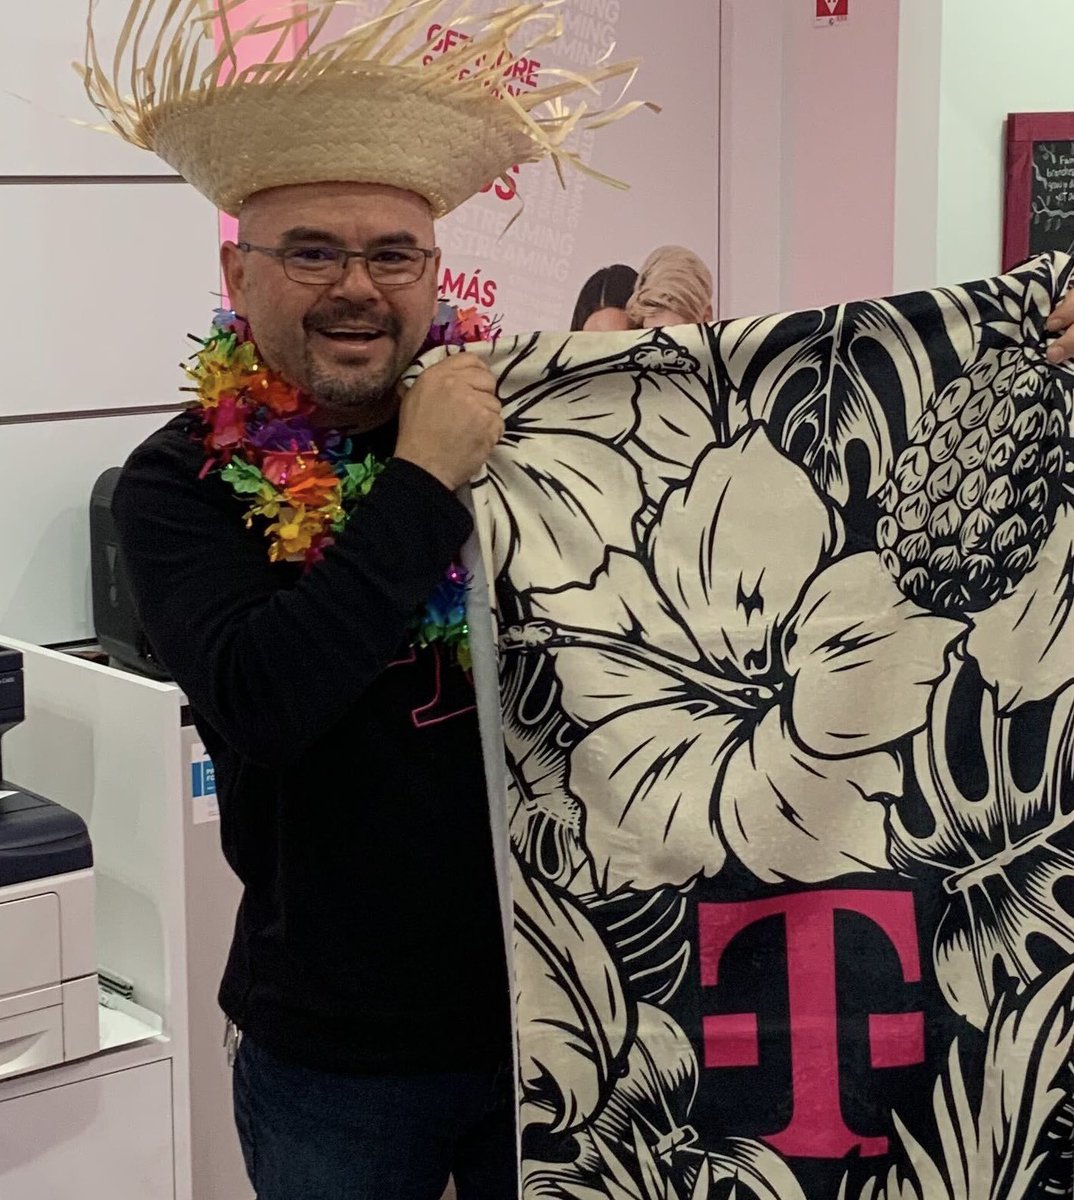 Congrats and well deserved Carlos! Thank you for your constant leadership and inspiration. You are the epitome of #WeWontStop ￼
#PEAK2023 ￼